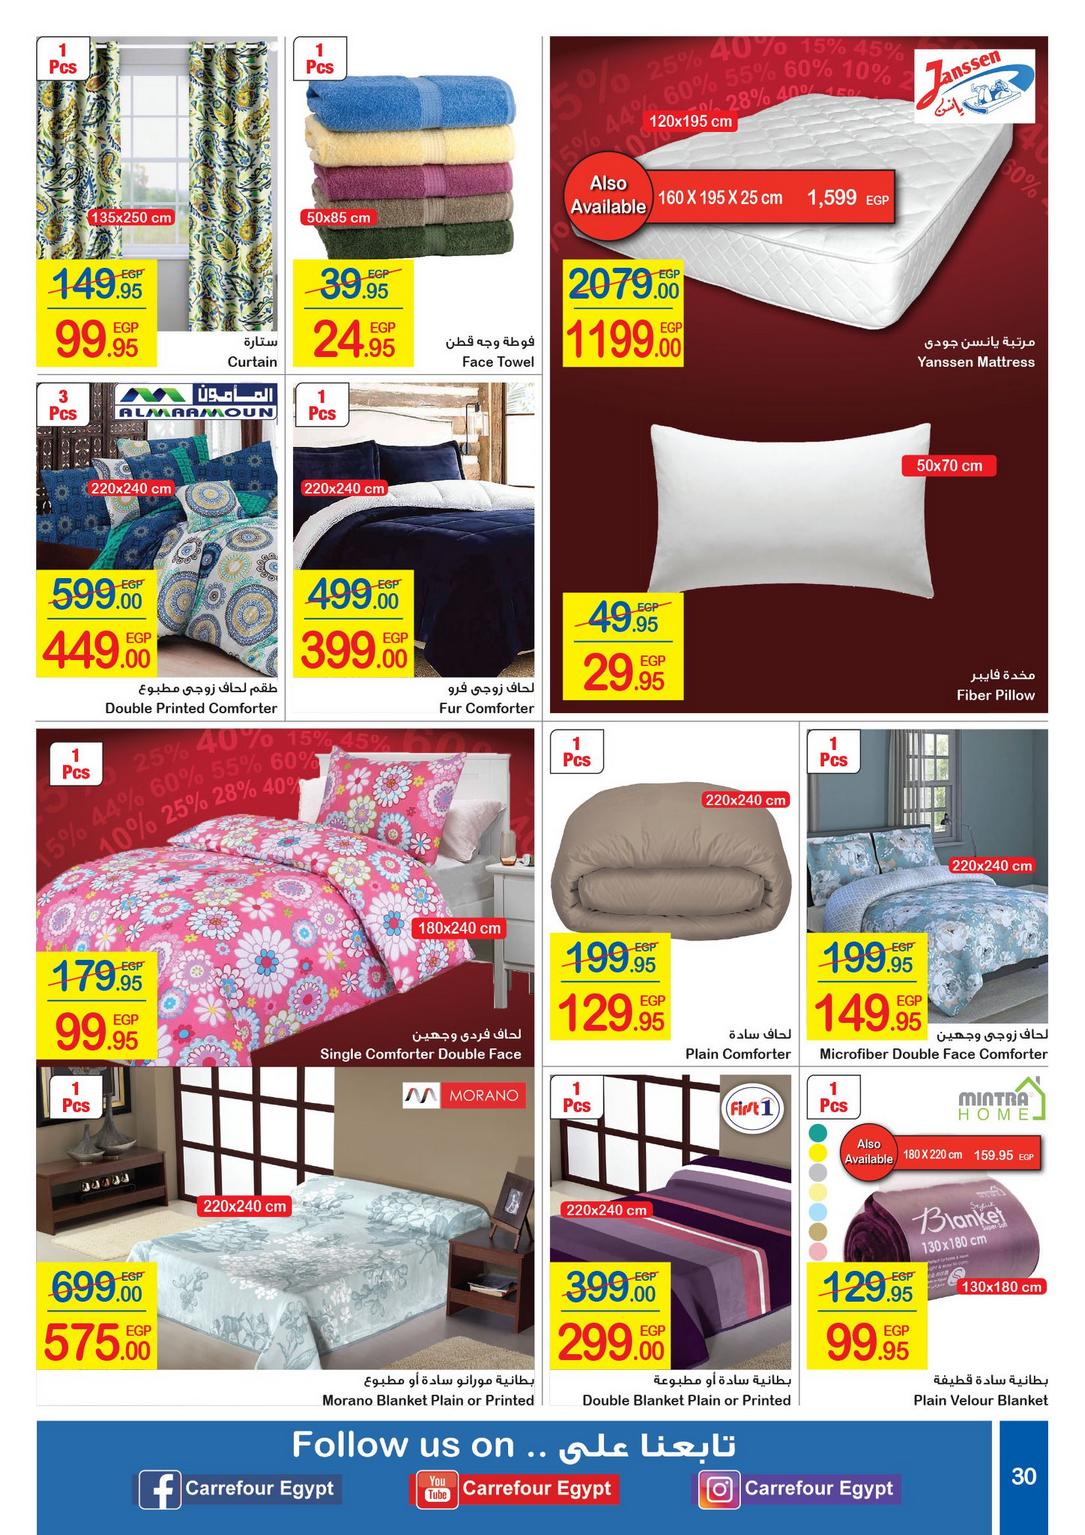 Carrefour Deals from 1/1 till 14/1 | Carrefour Egypt 31